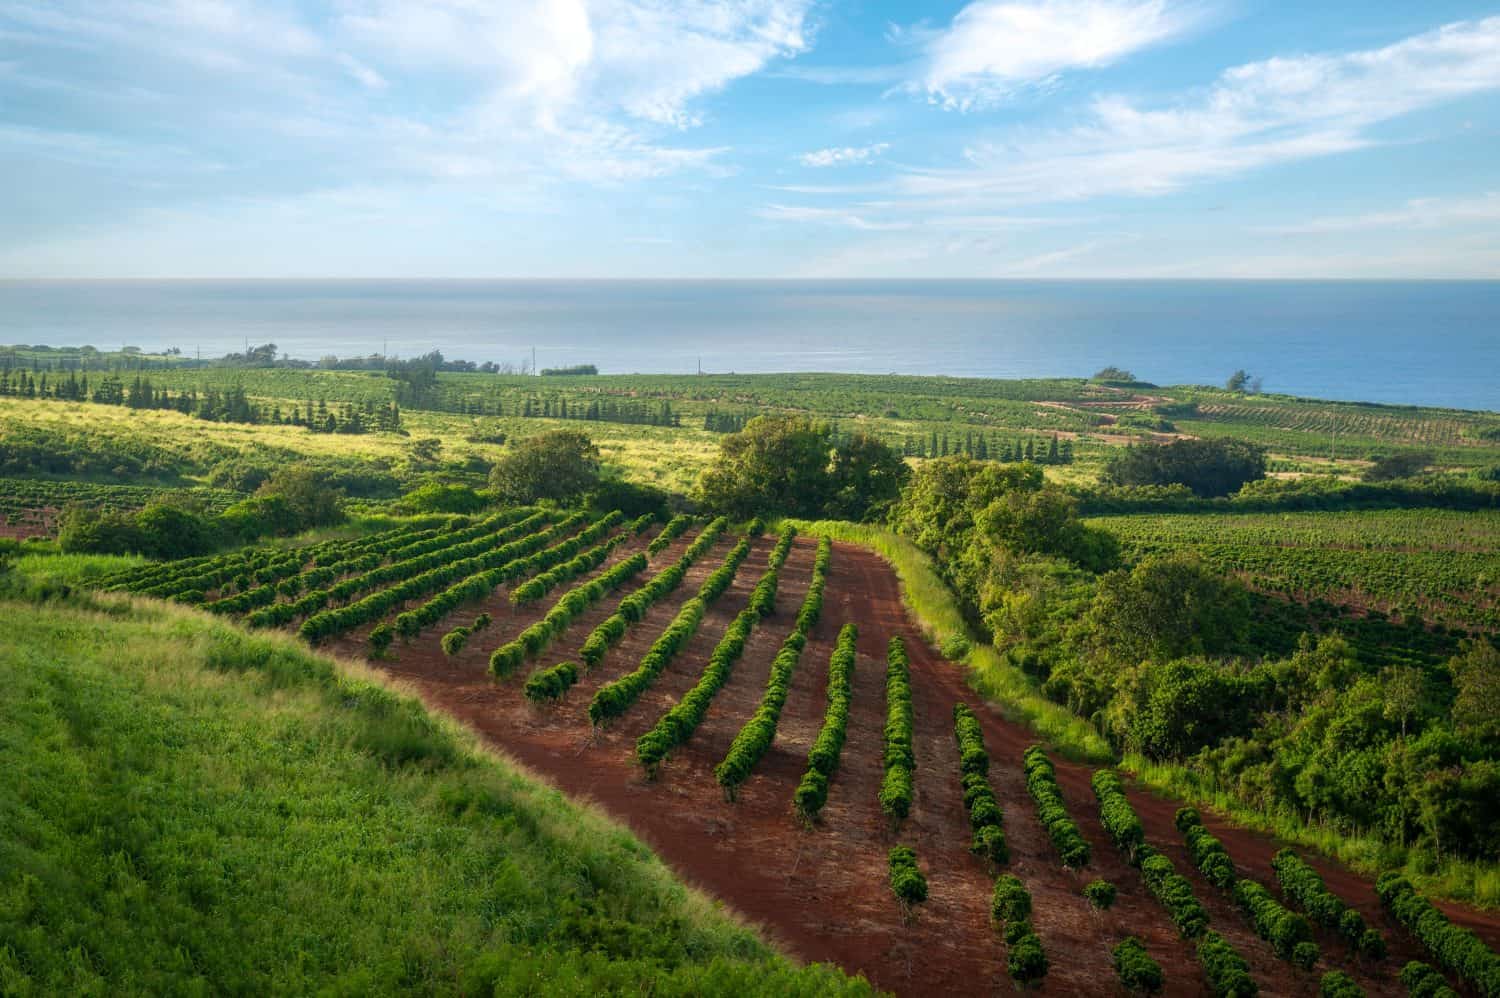 Coffee Plantation on the Island of Kauai, Hawaii. The young coffee plants are spaced in rows so that the density varies between 1,200 and 1,800 plants per hectare. Kalaho, Kauai is featured here.